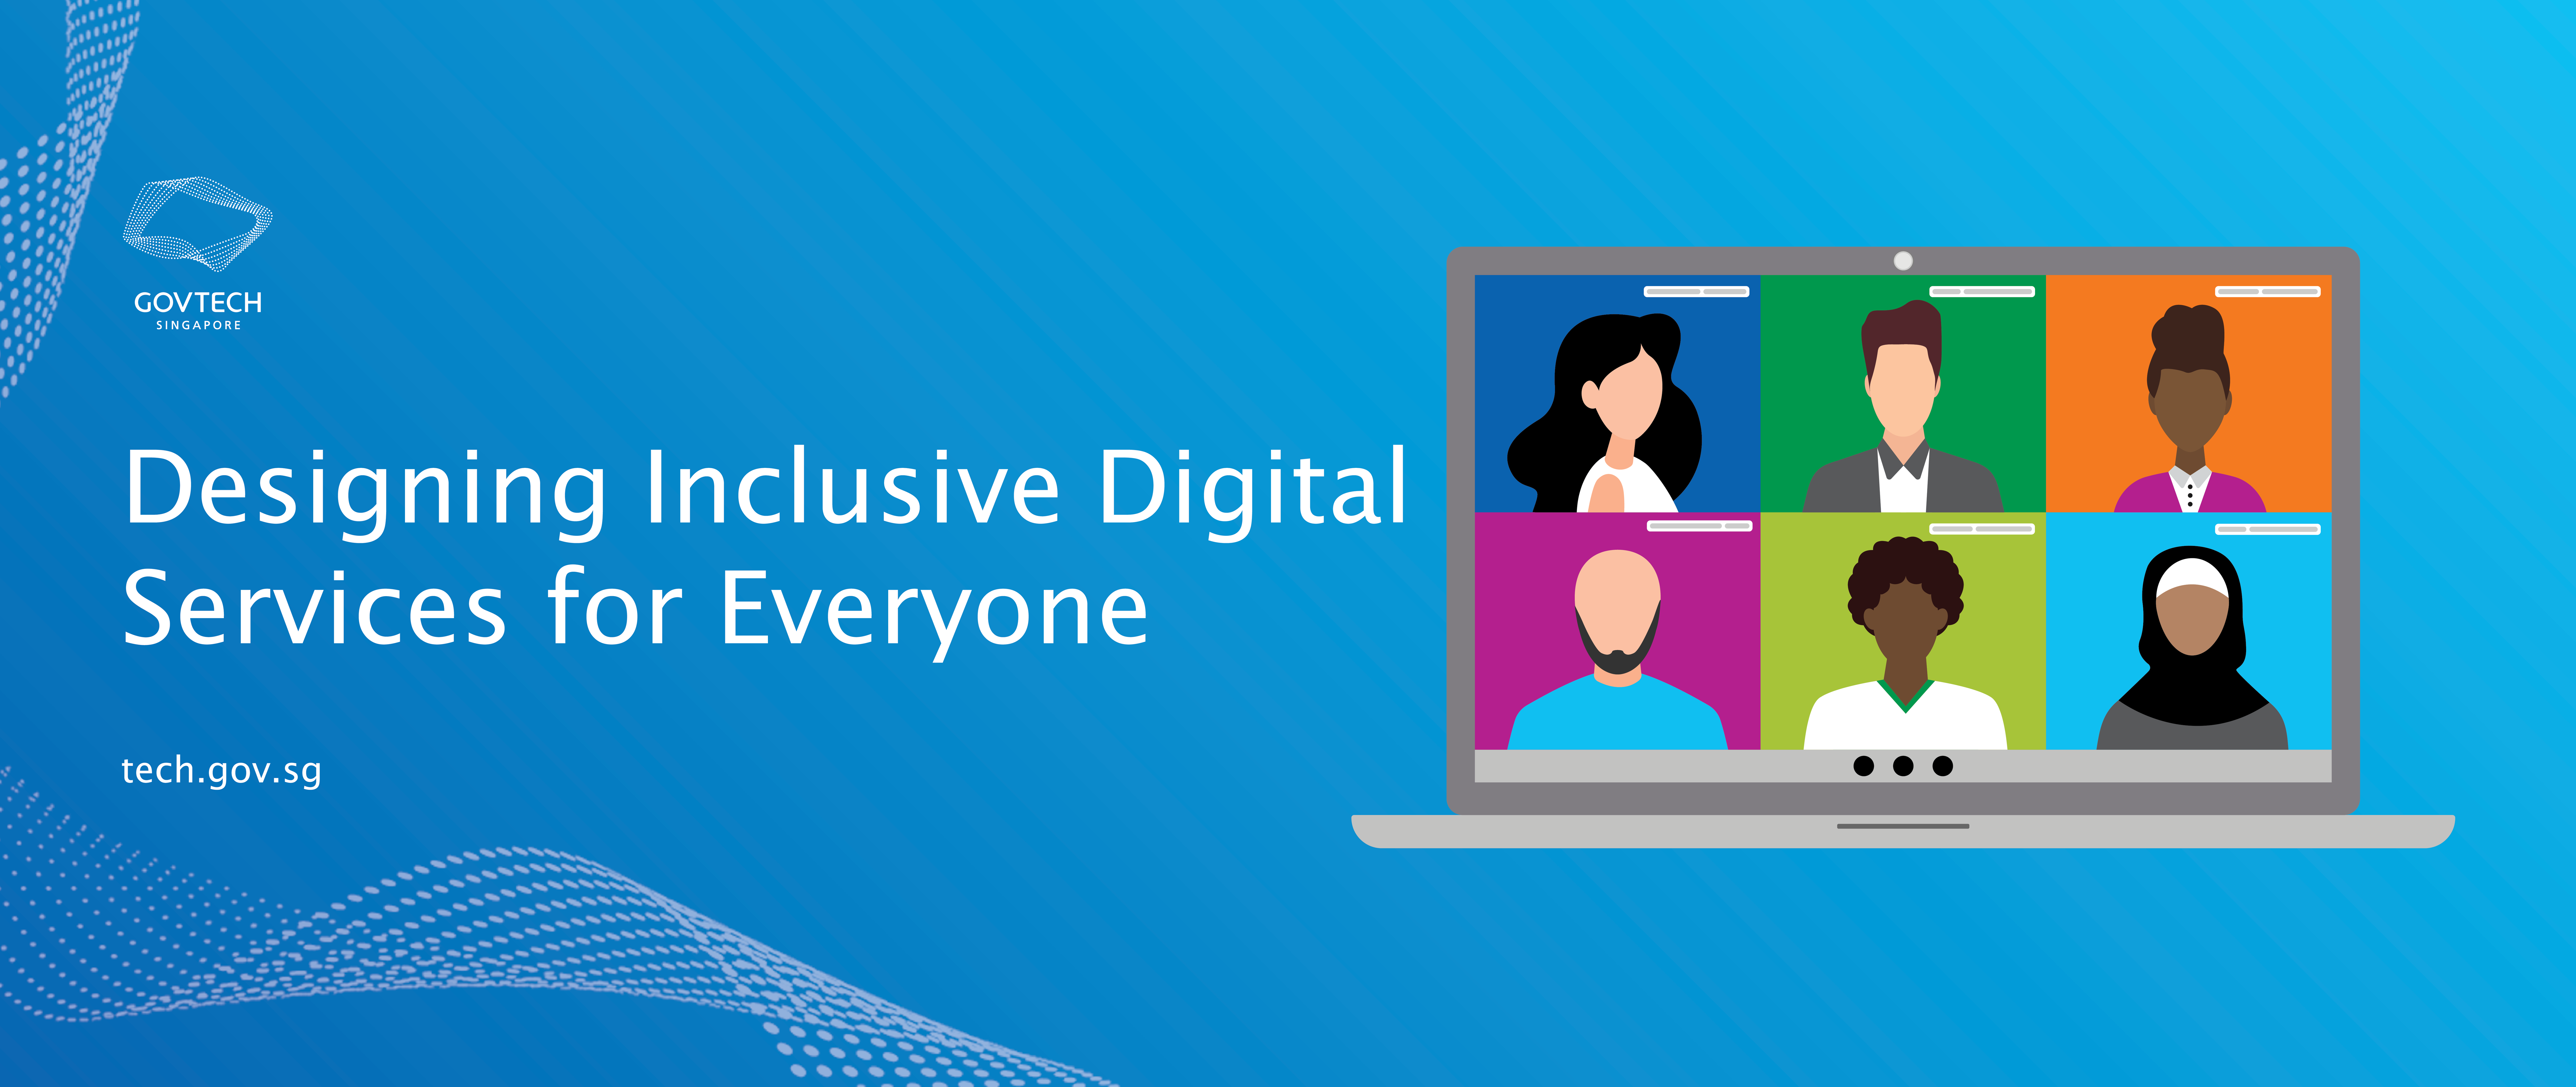 Designing Inclusive Digital Services for Everyone